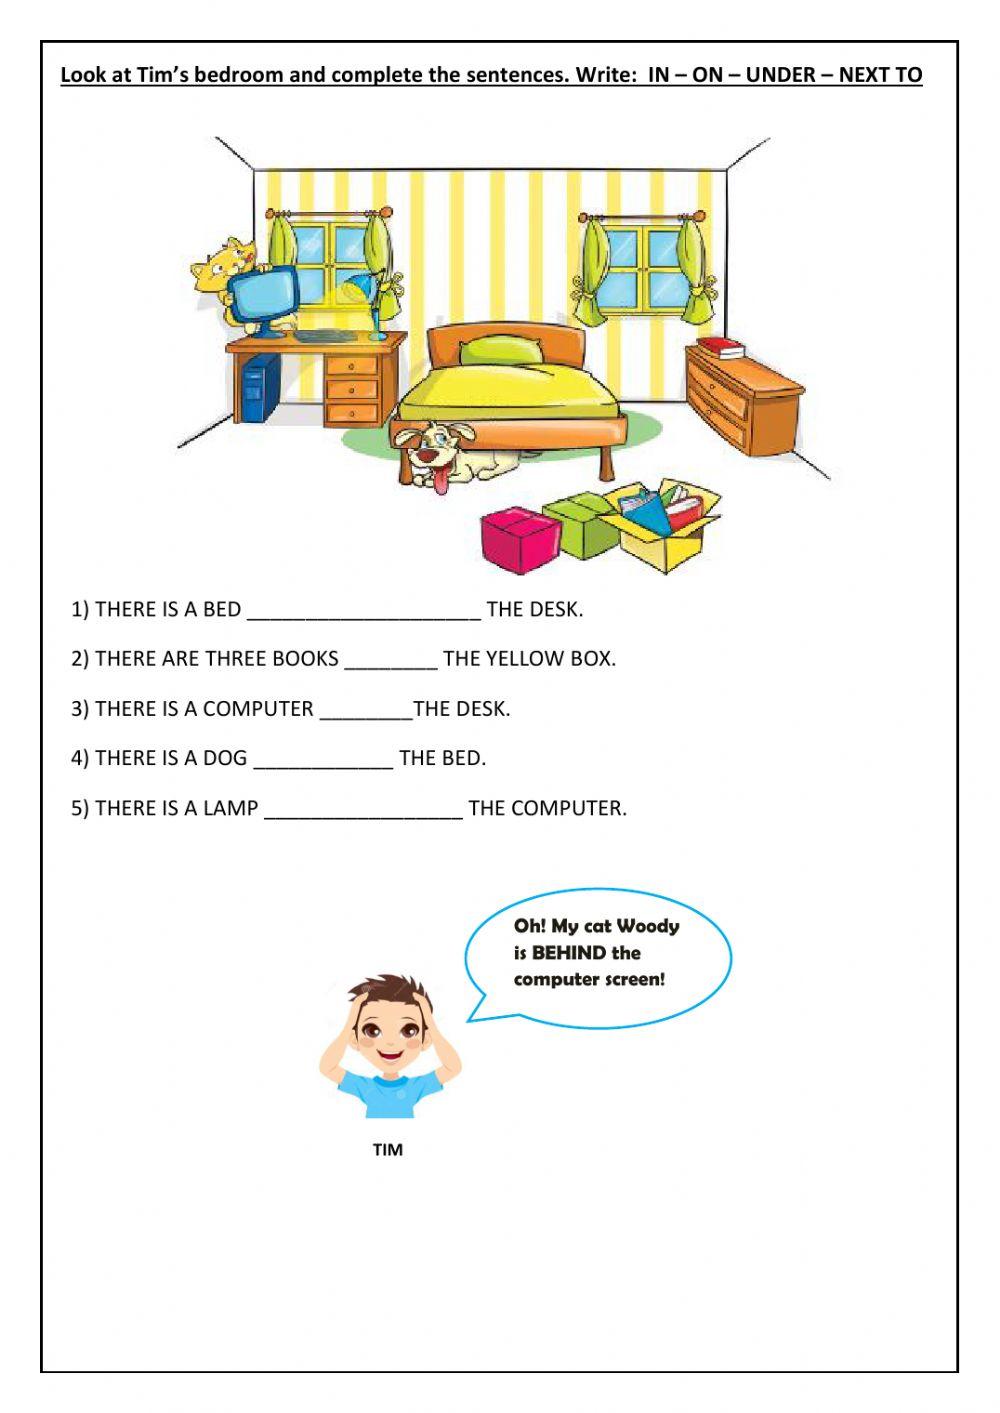 Complete using prepositions of place